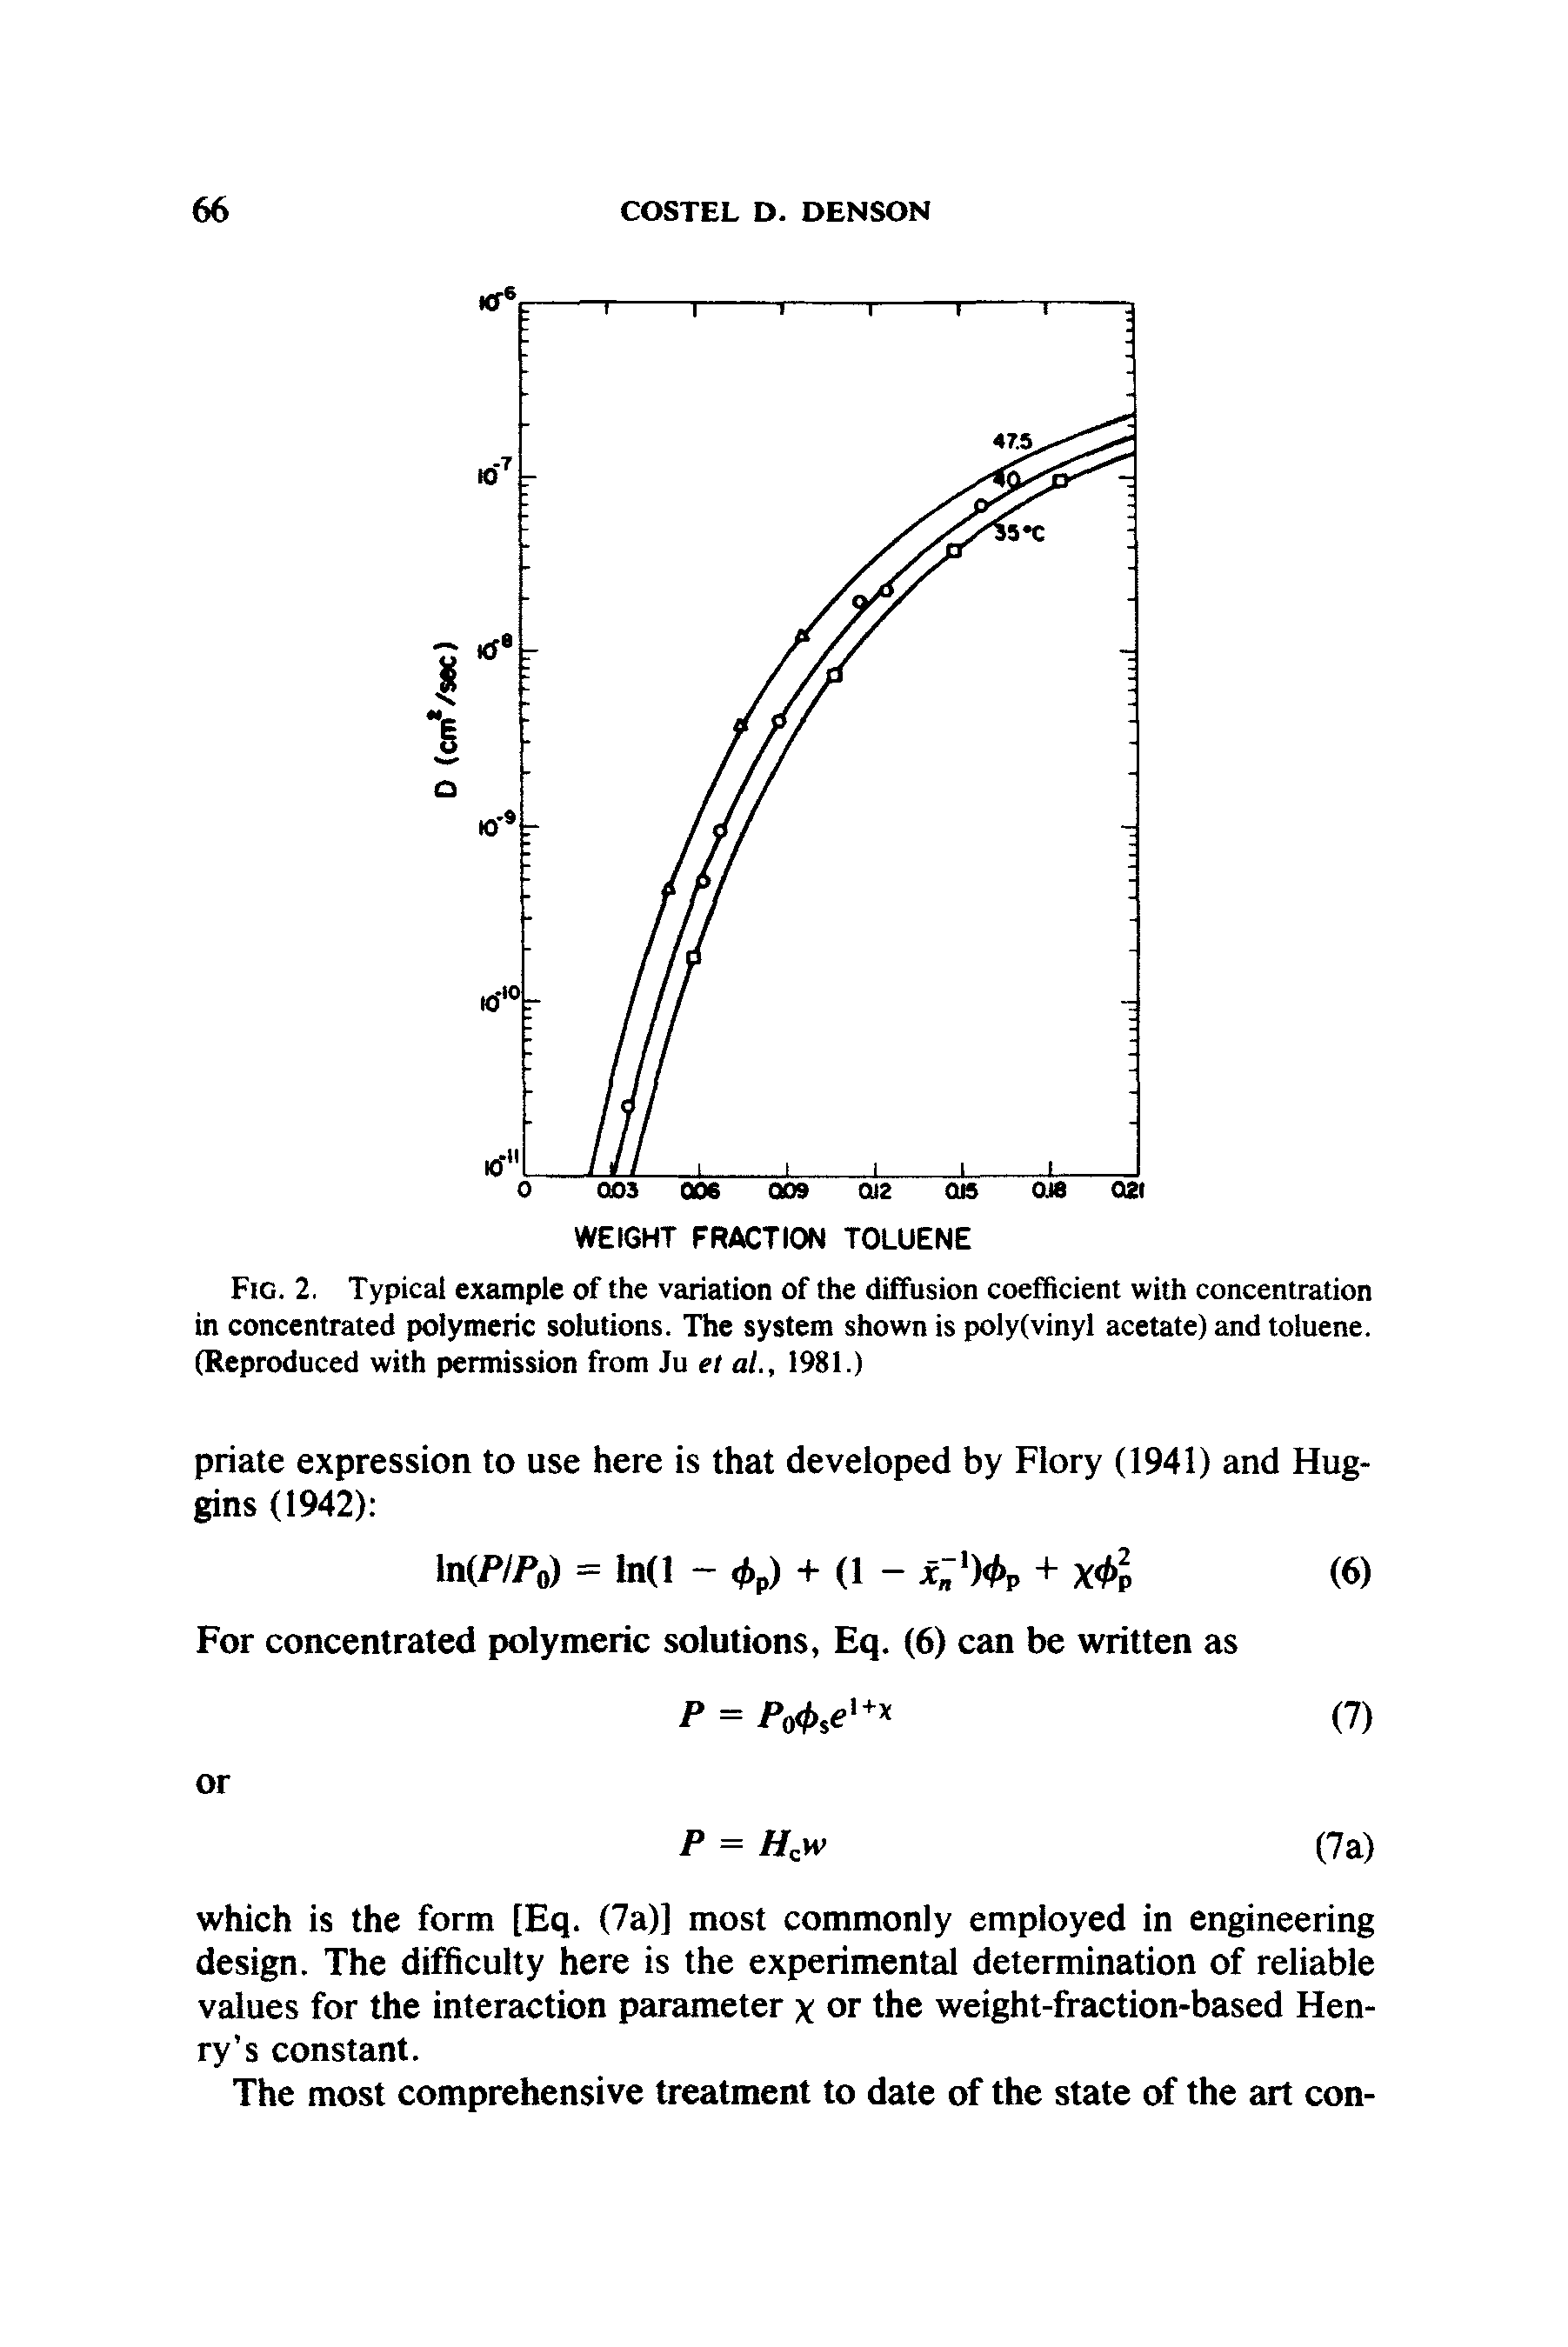 Fig. 2. Typical example of the variation of the diffusion coefficient with concentration in concentrated polymeric solutions. The system shown is polyfvinyl acetate) and toluene. (Reproduced with permission from Ju el al., 1981.)...